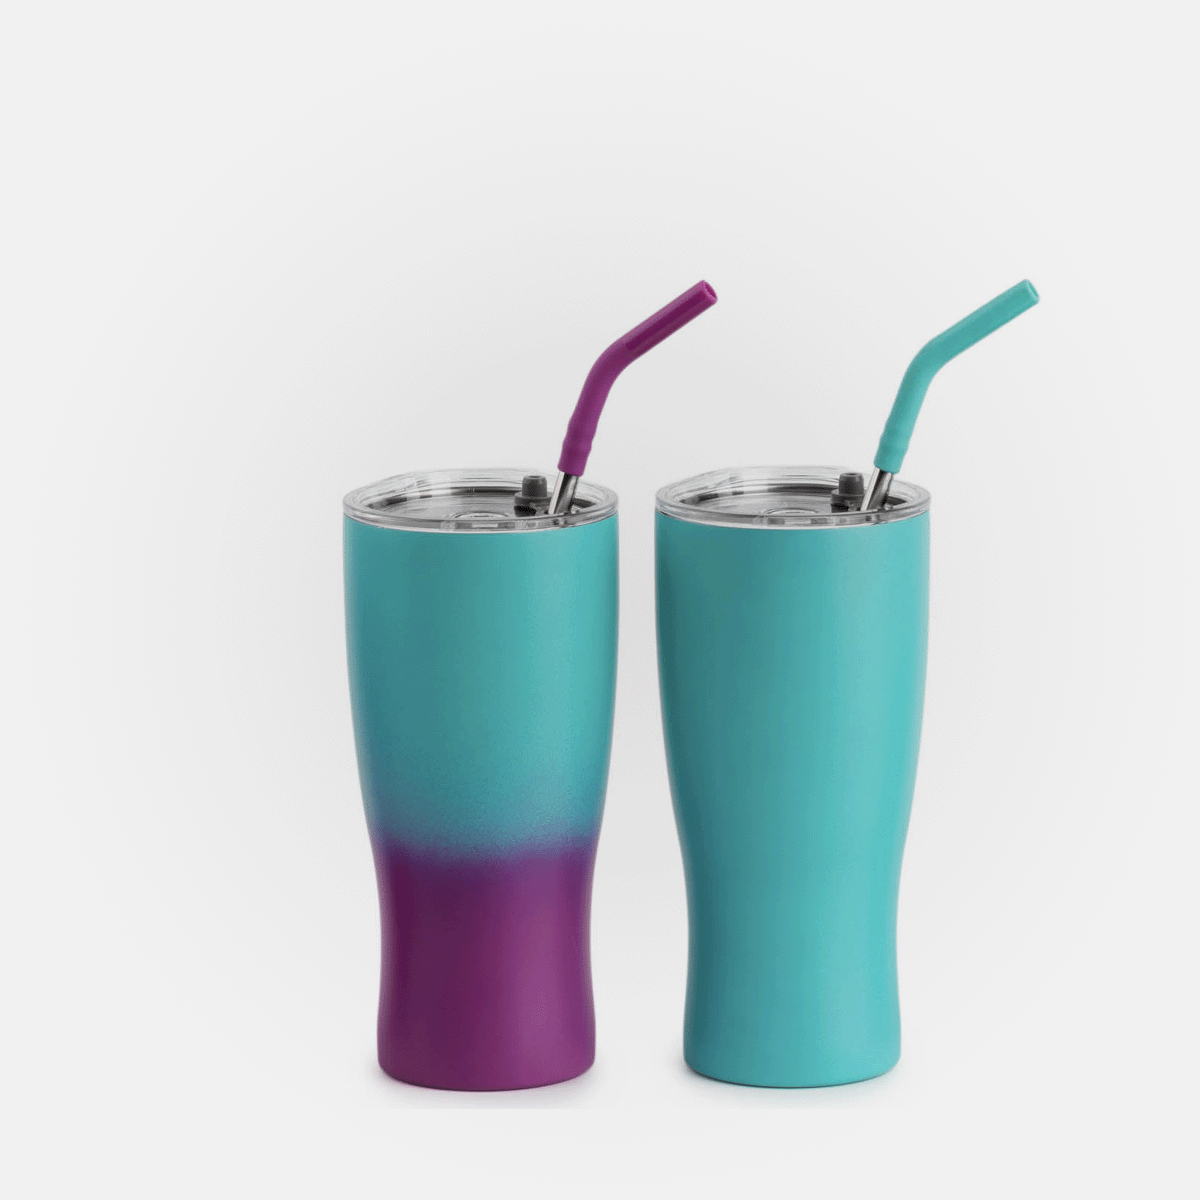 Purple 40oz Insulated Tumbler With Lid & Set of 4 Straw Toppers